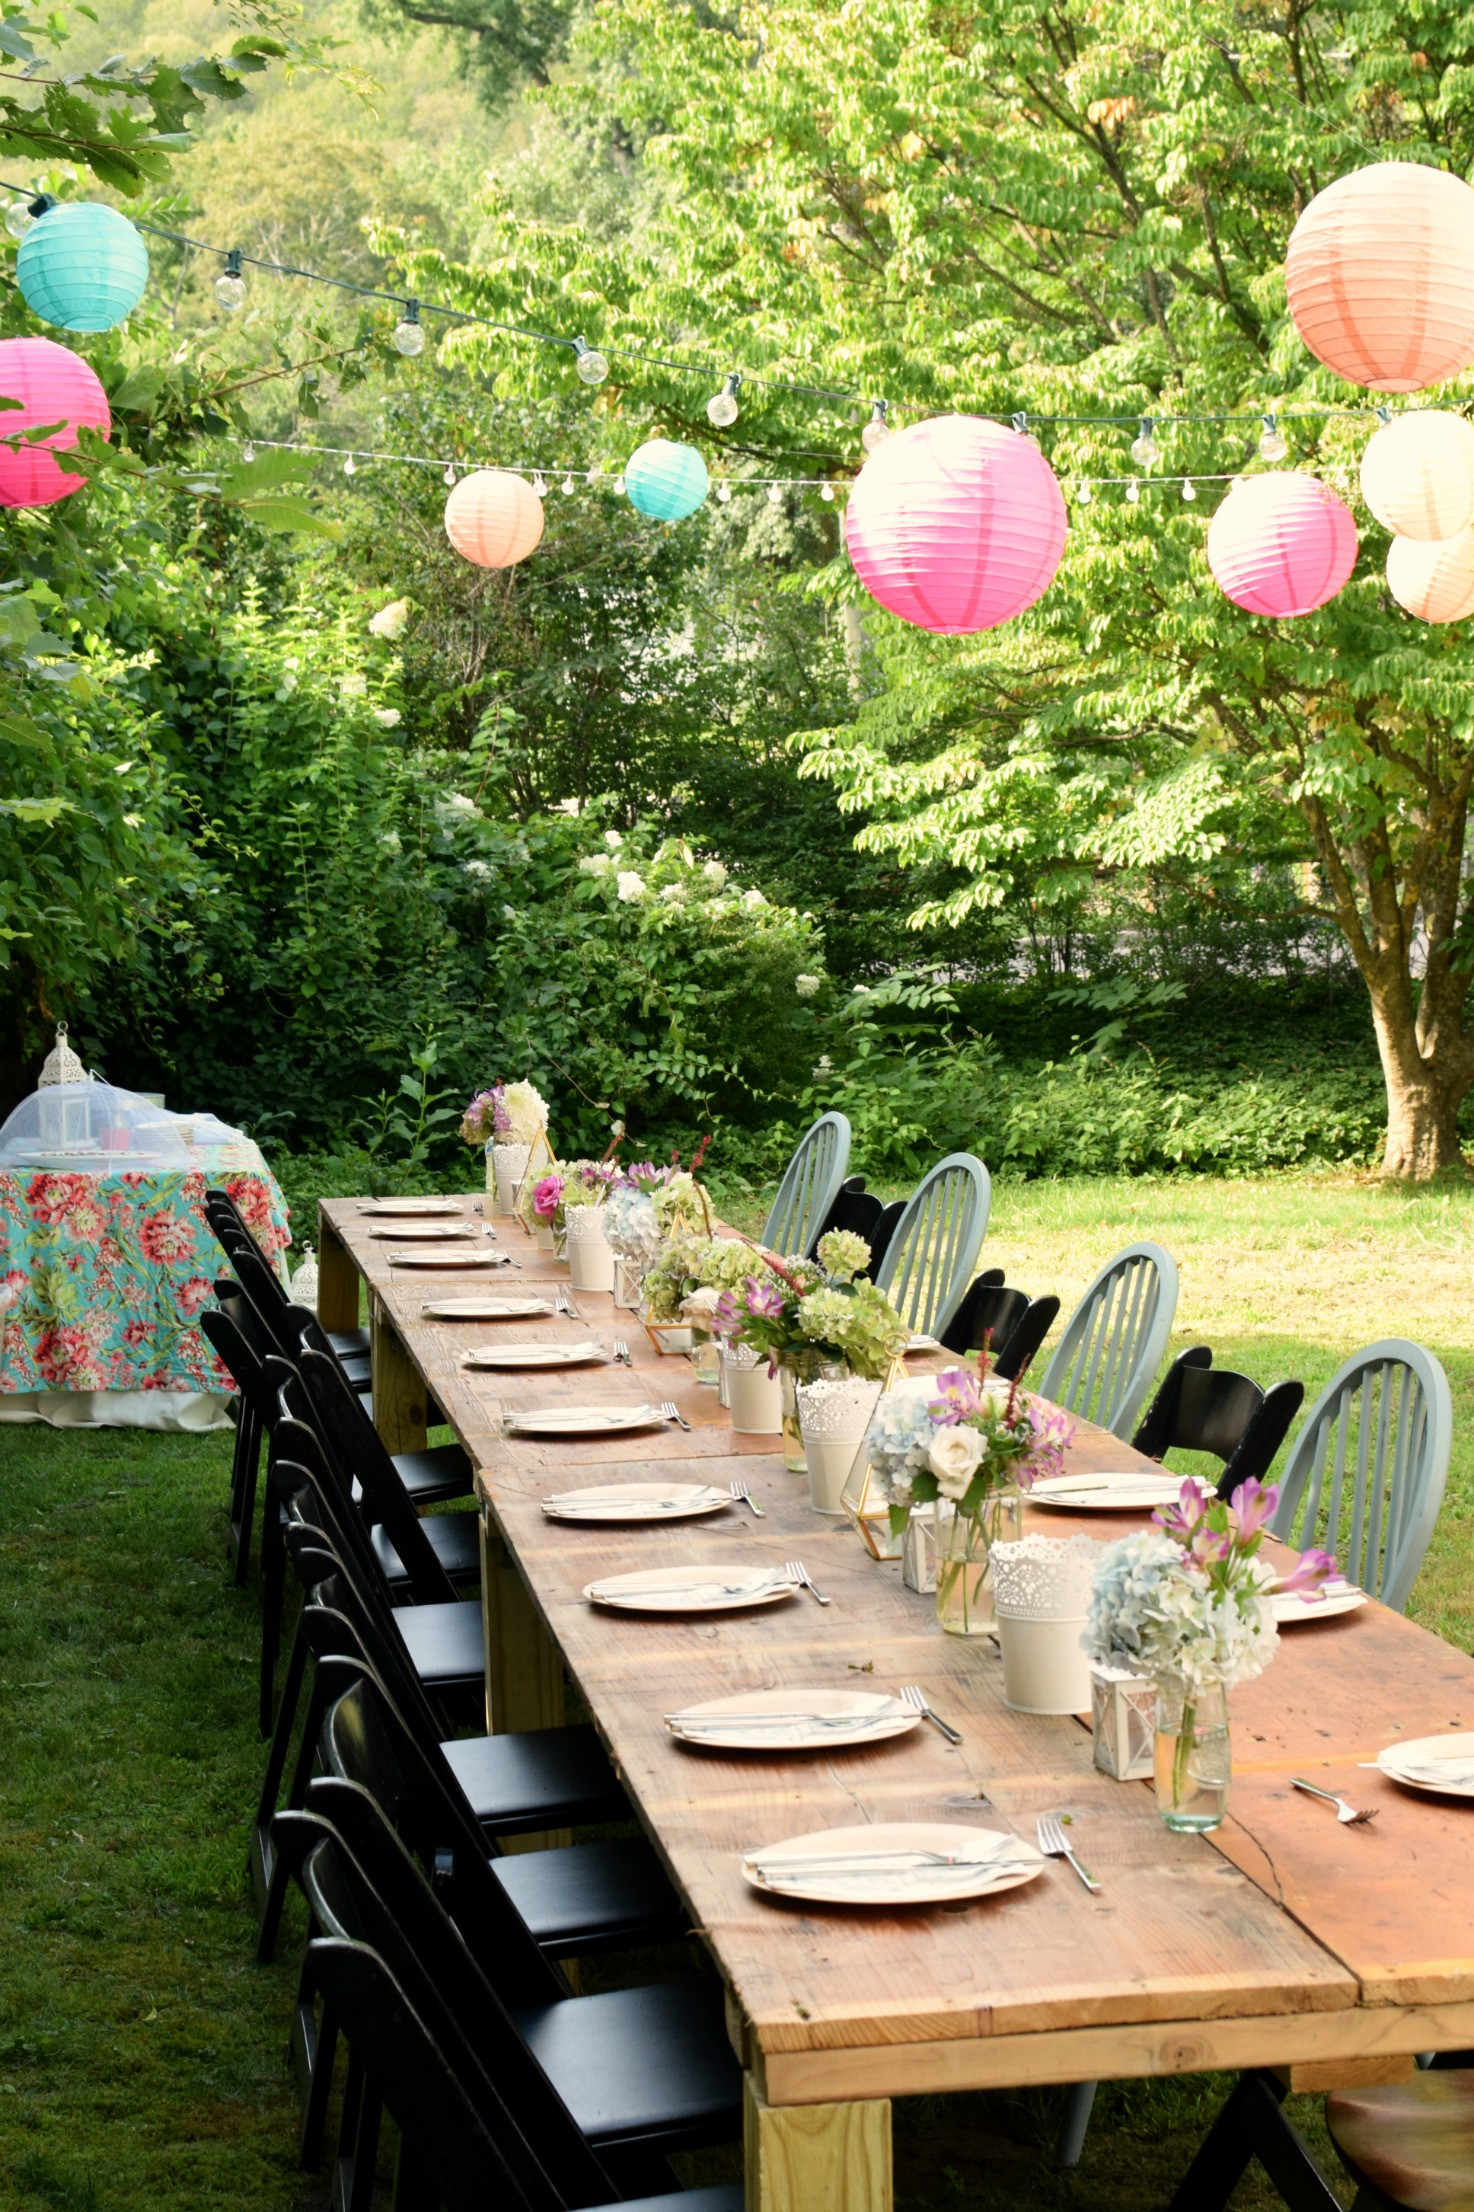 Ideas And Designs For A Backyard Engagement Party
 Charming Garden Party perfect for your next party idea